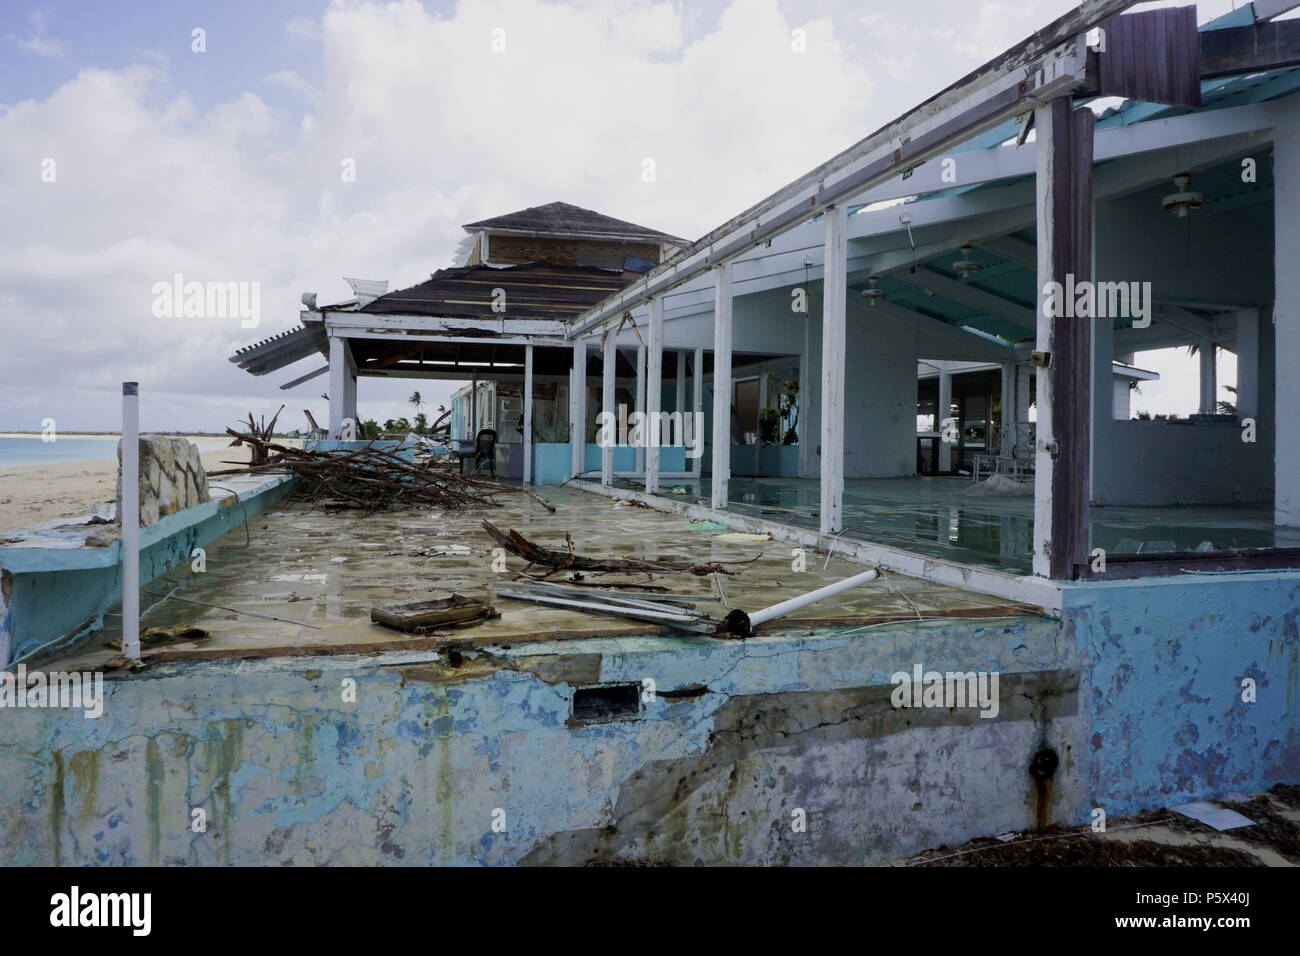 Falmouth Superyacht Dock, Antigua Banque D'Images